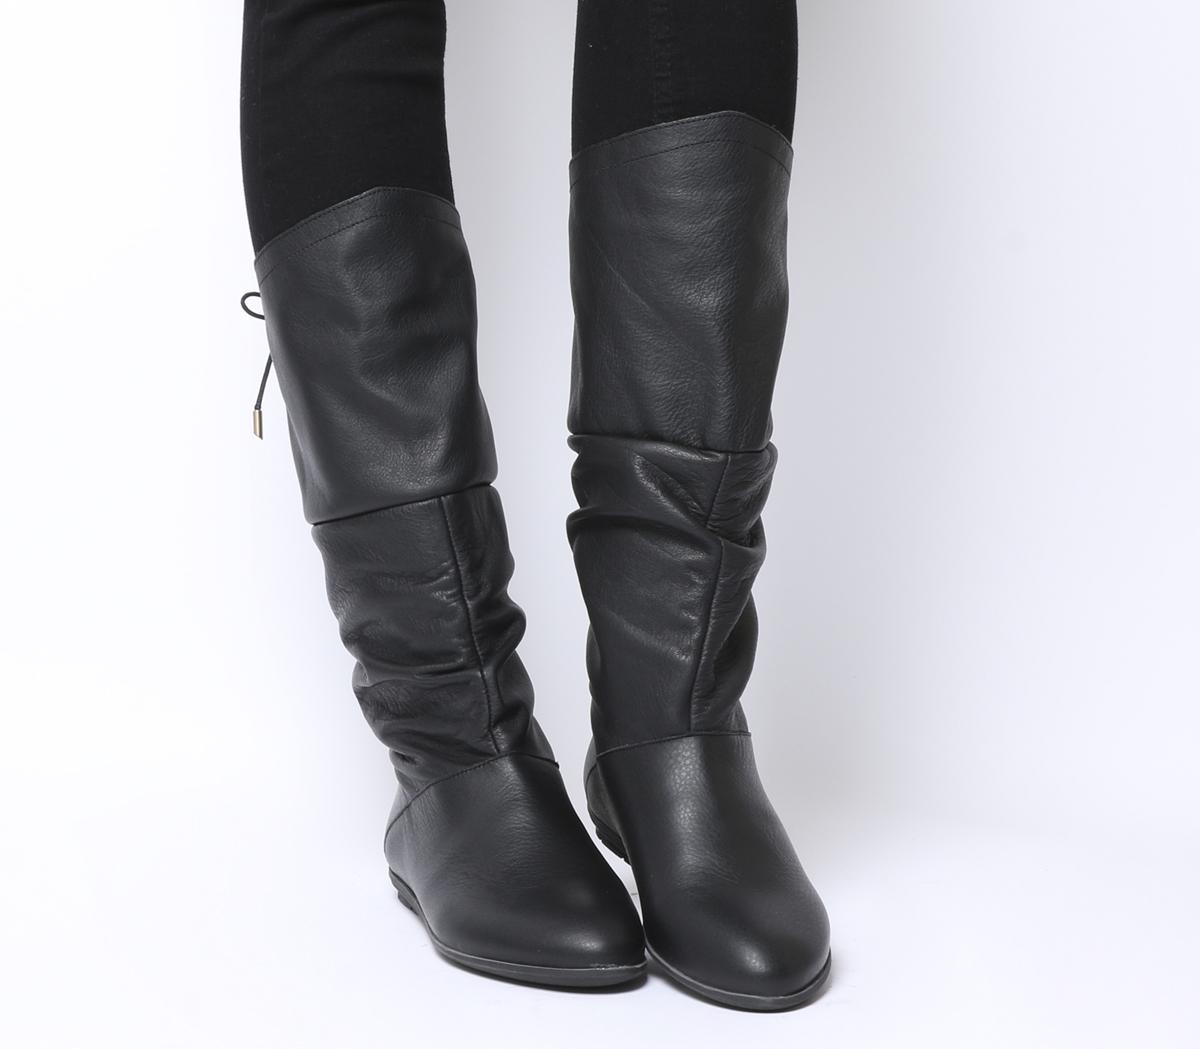 Details about   Elegant Faux Leather Womens Flat Back Zipper Riding Shoes Knee High Casual Boots